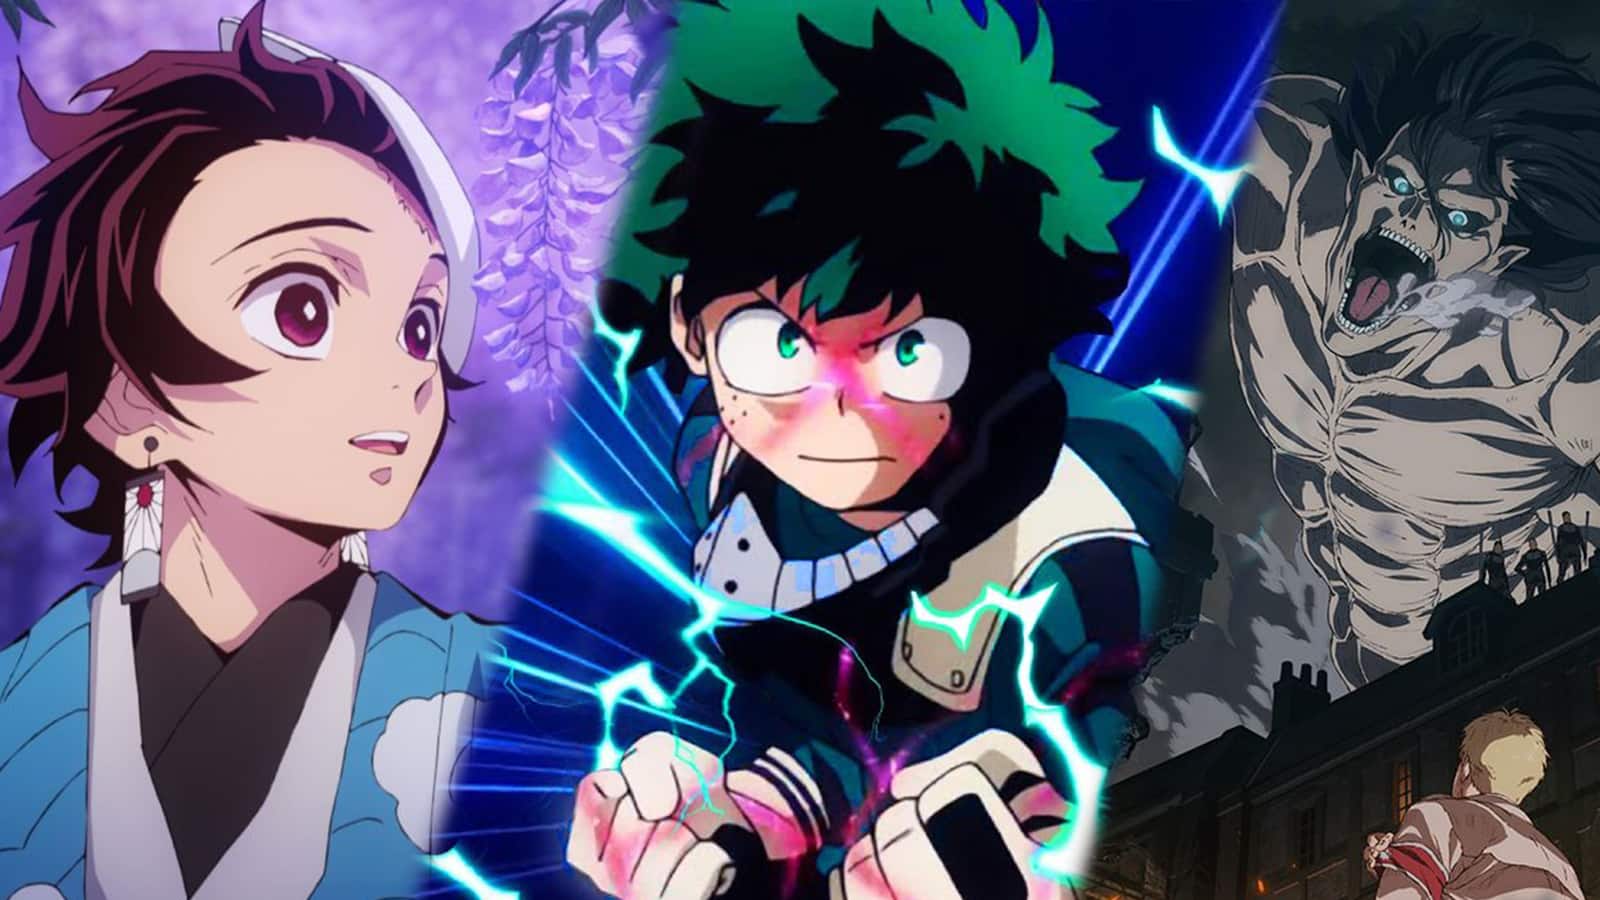 Anime Games In 2018: Attack On Titan, My Hero Academia, And More - GameSpot